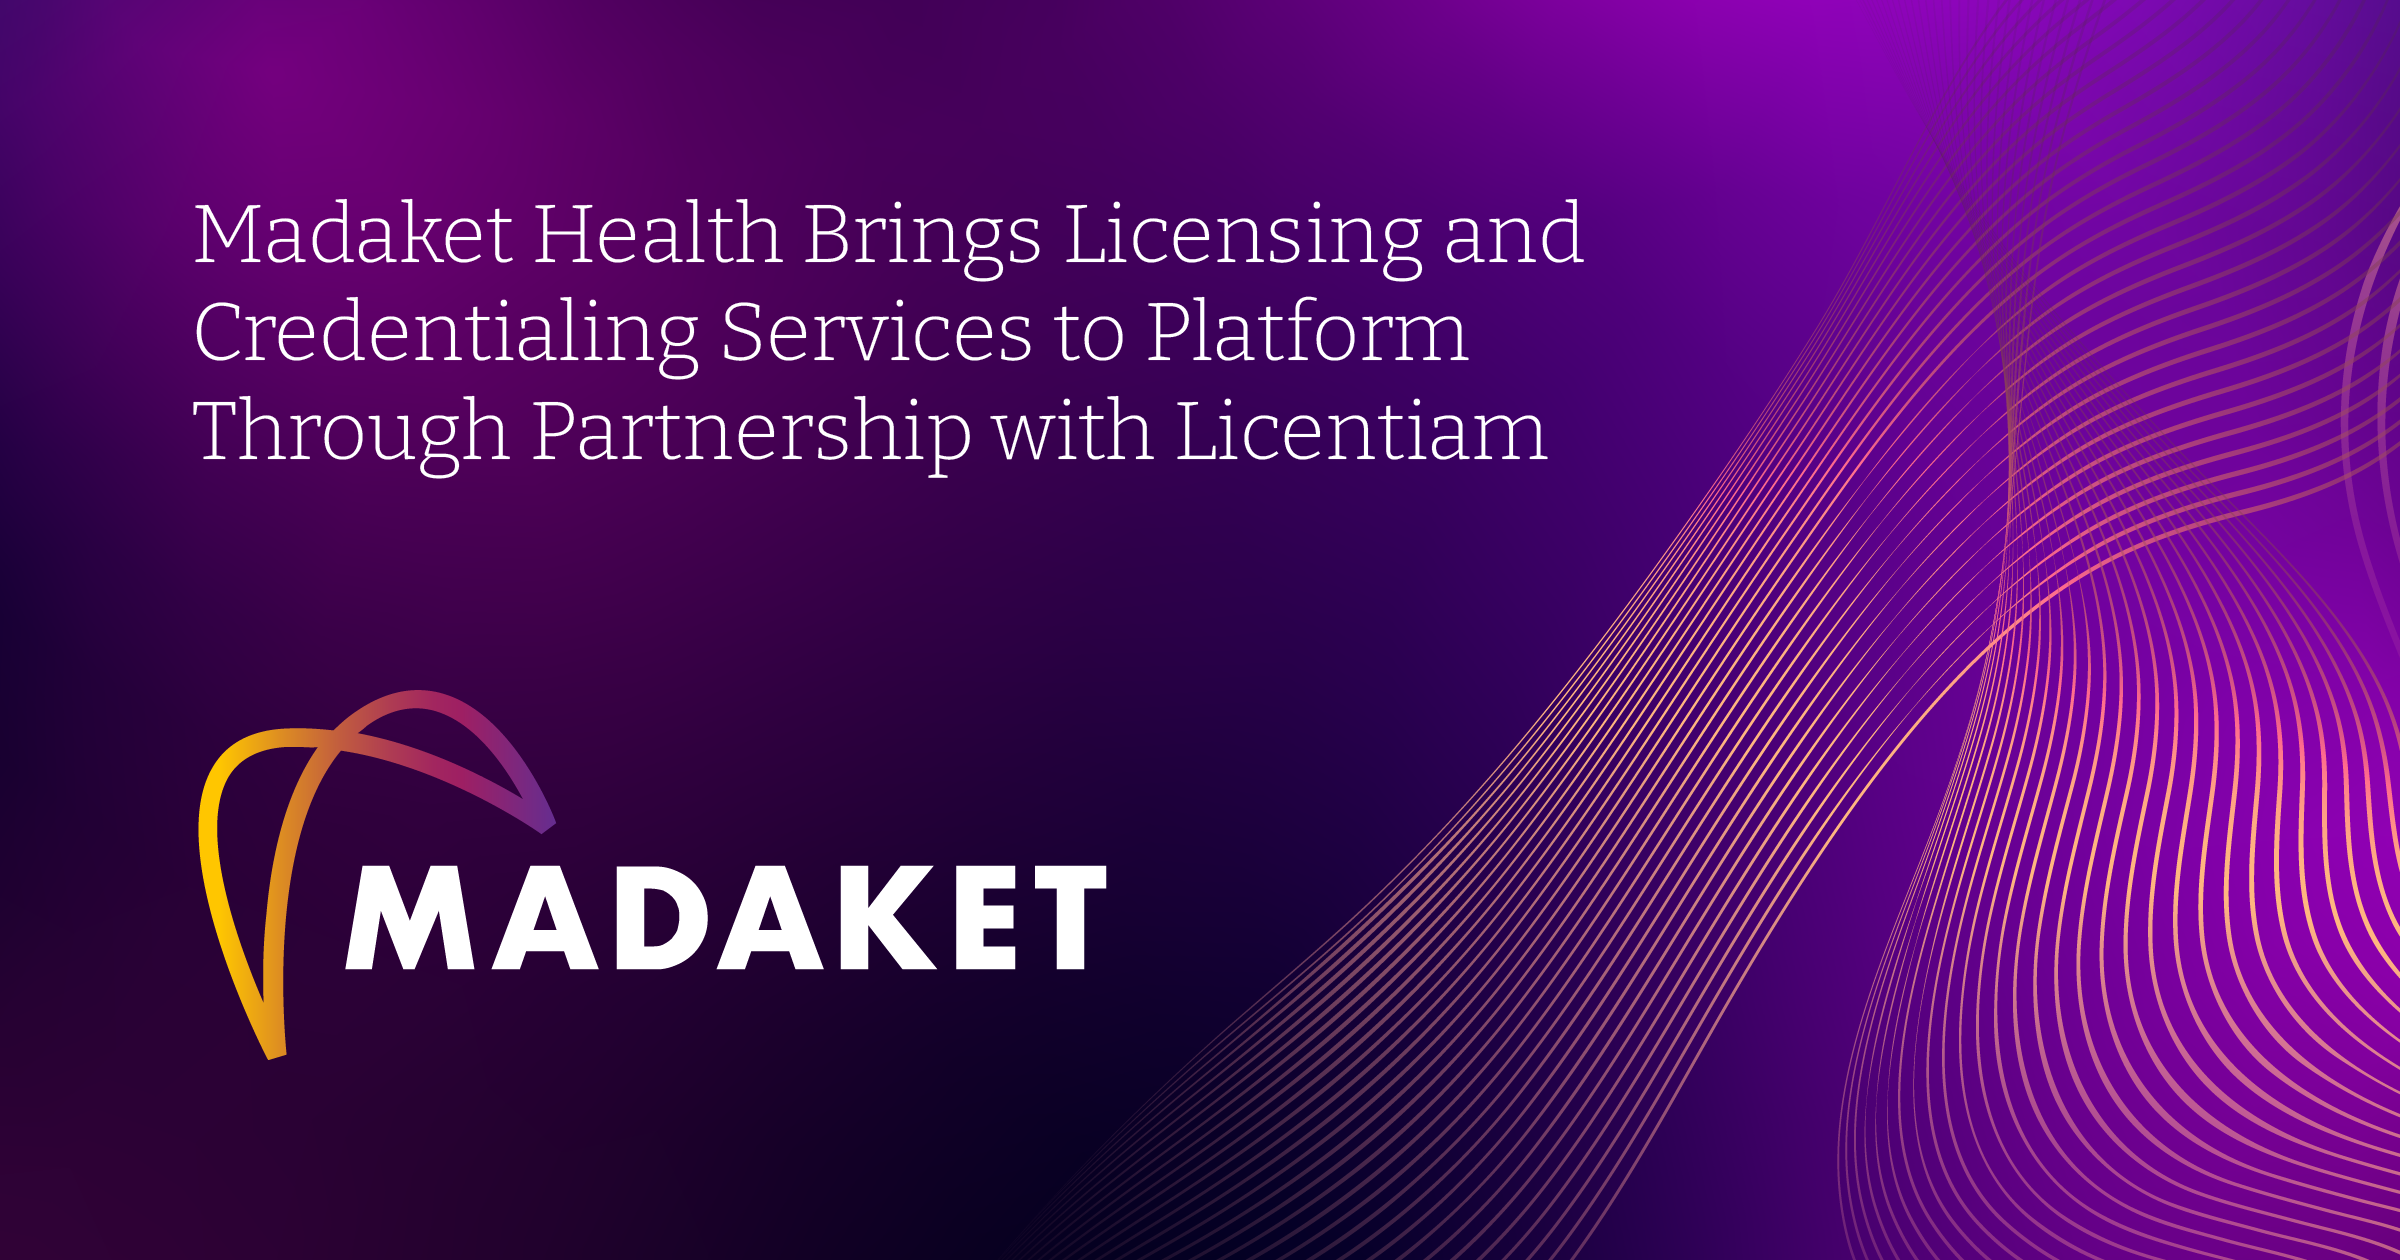 Madaket Health Brings Licensing and Credentialing Services to Platform Through Partnership with Licentiam cover image